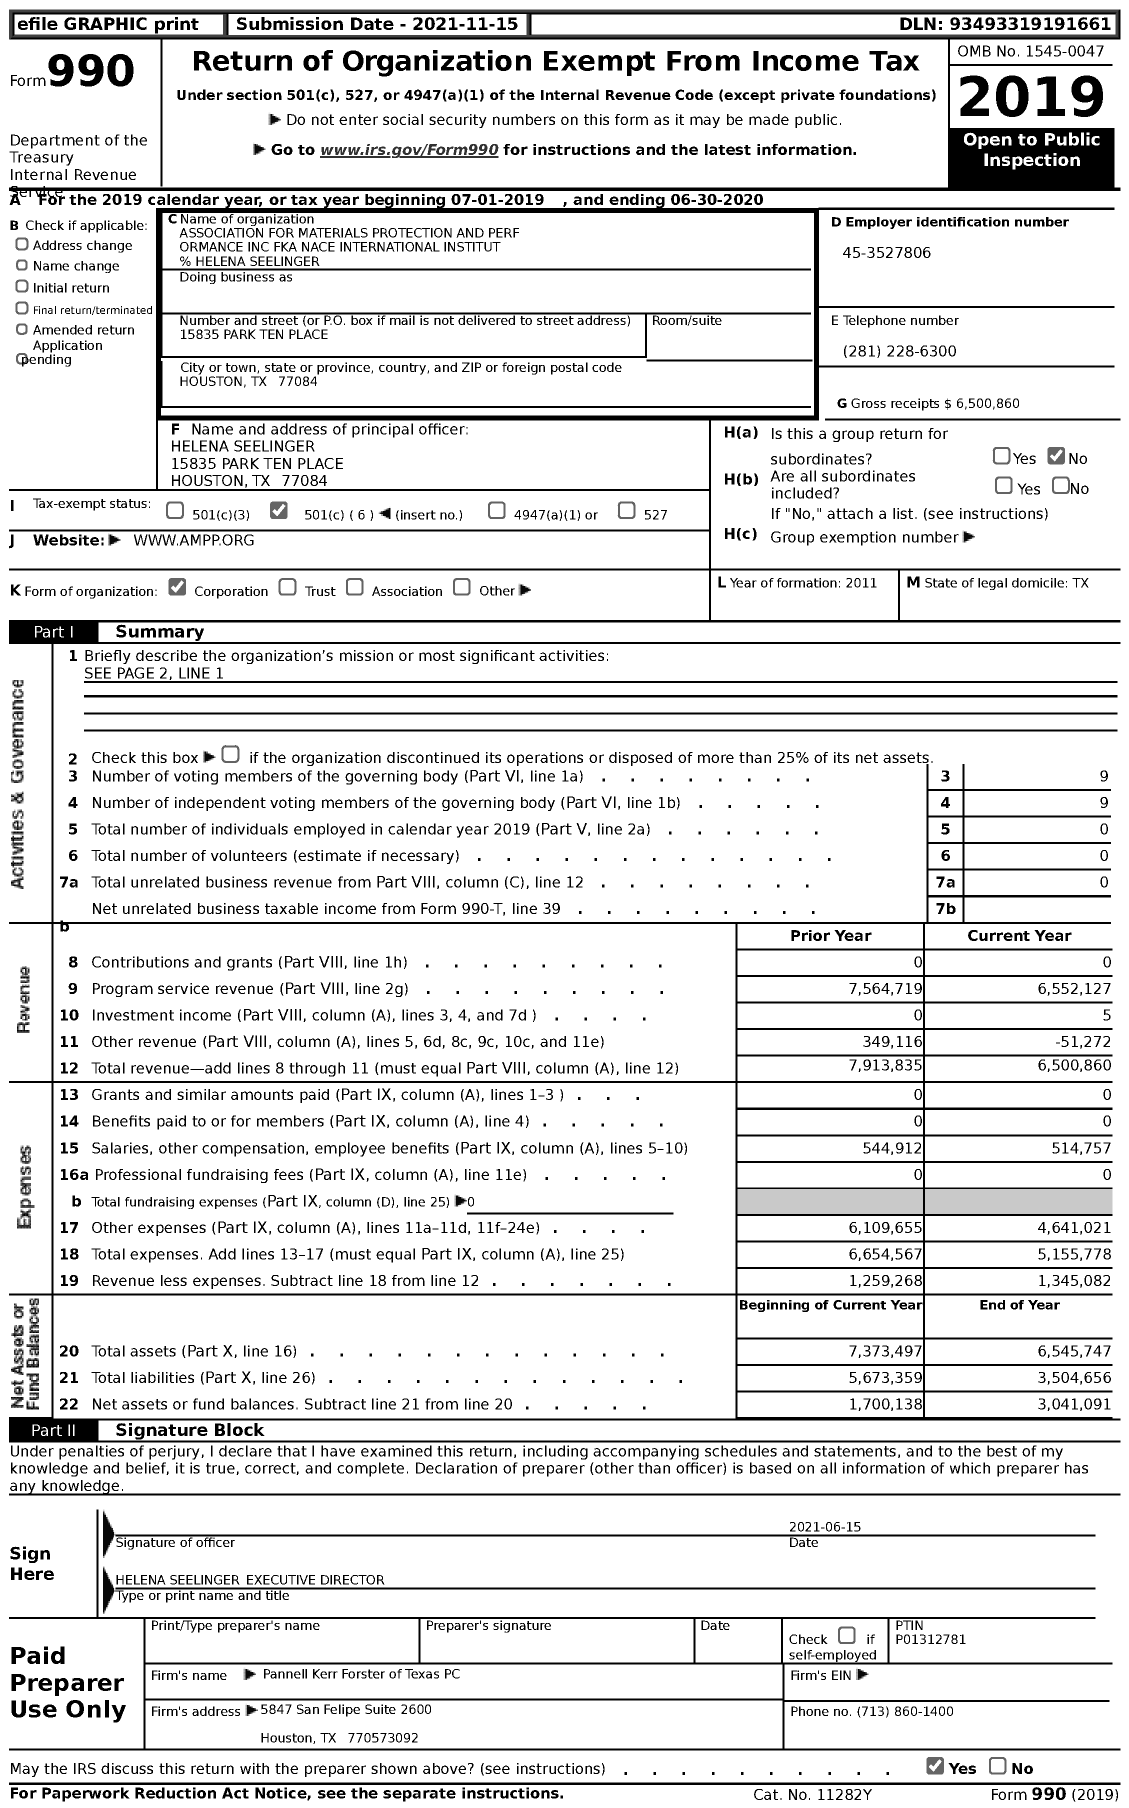 Image of first page of 2019 Form 990 for Association for Materials Protection and Performance Ormance